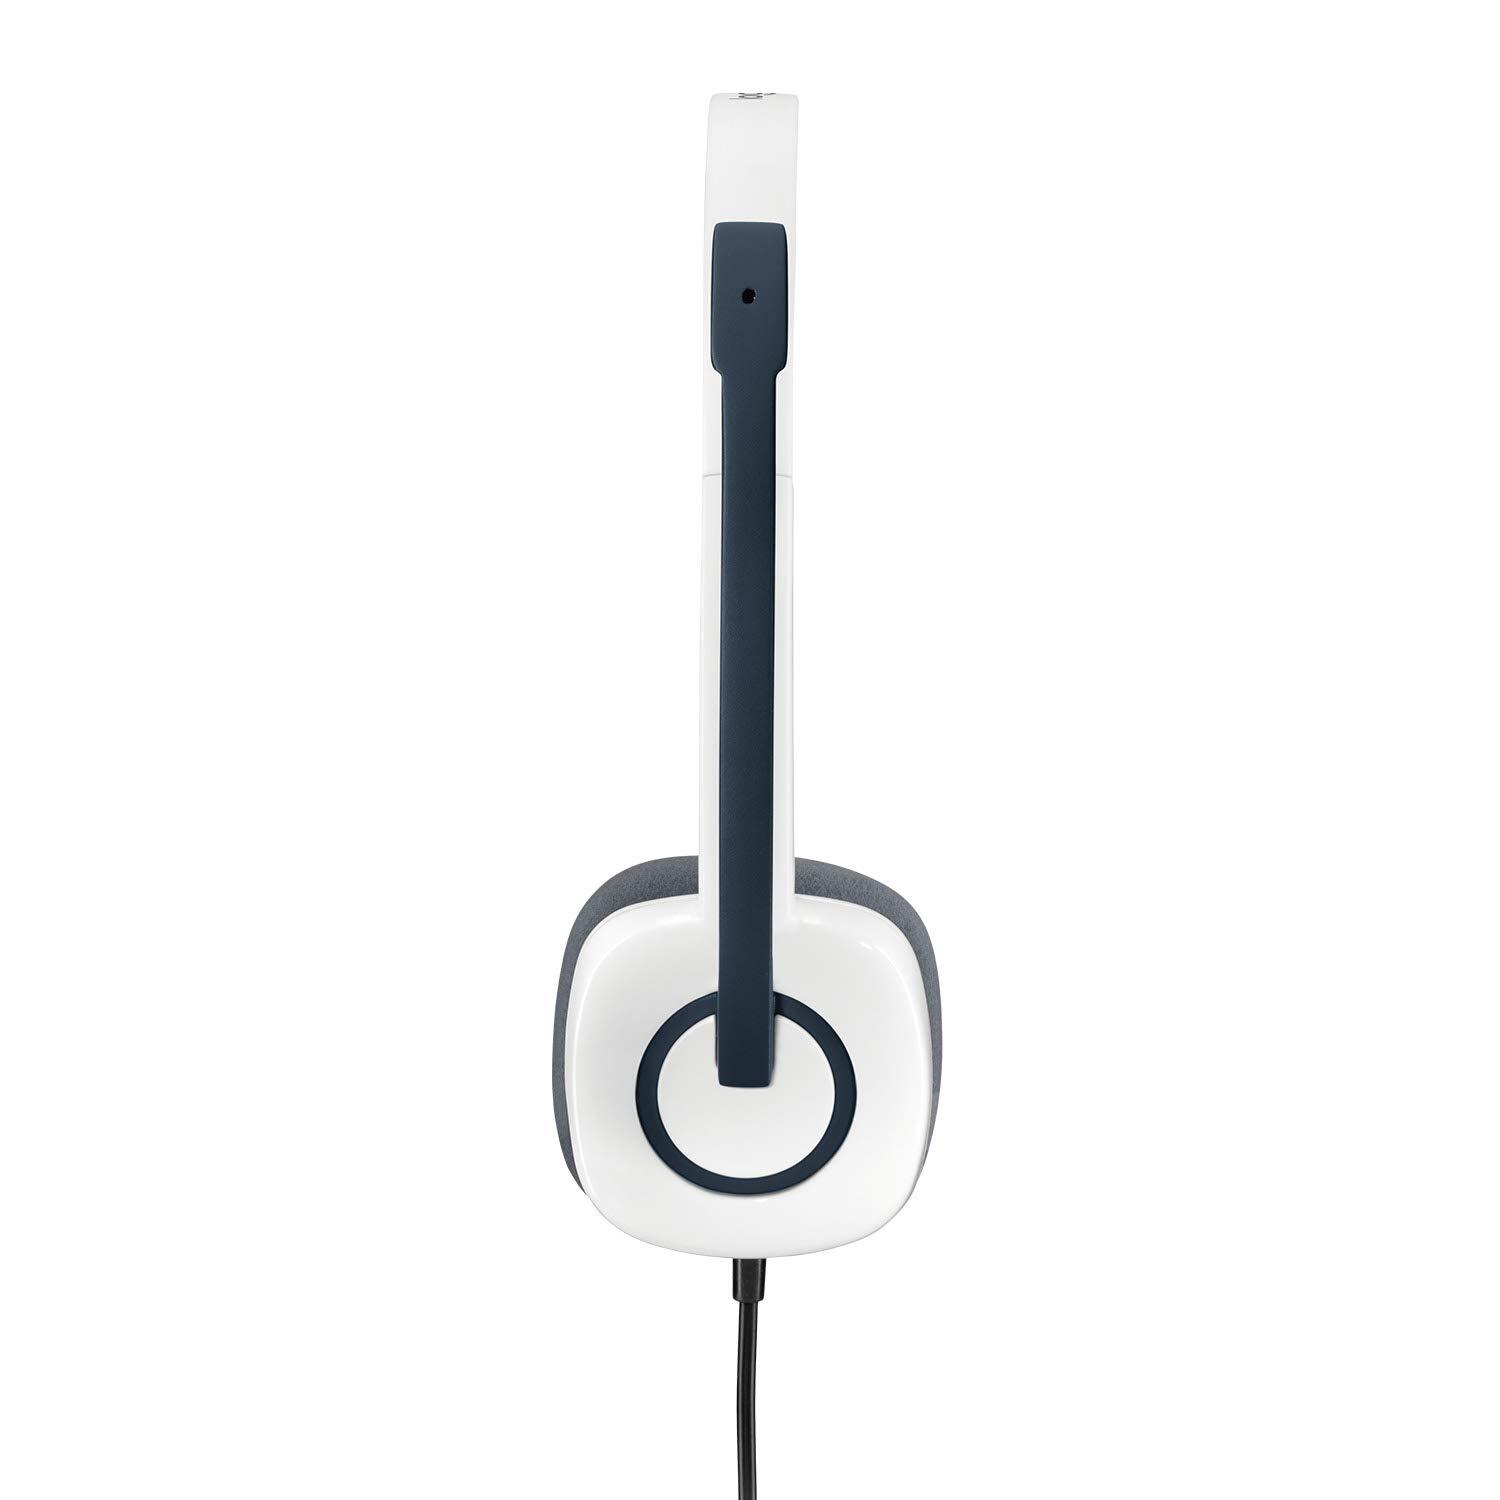 Logitech H150 Wired Stereo Dual 3.5mm Headset with 180° Rotatable Microphone, Cloud White